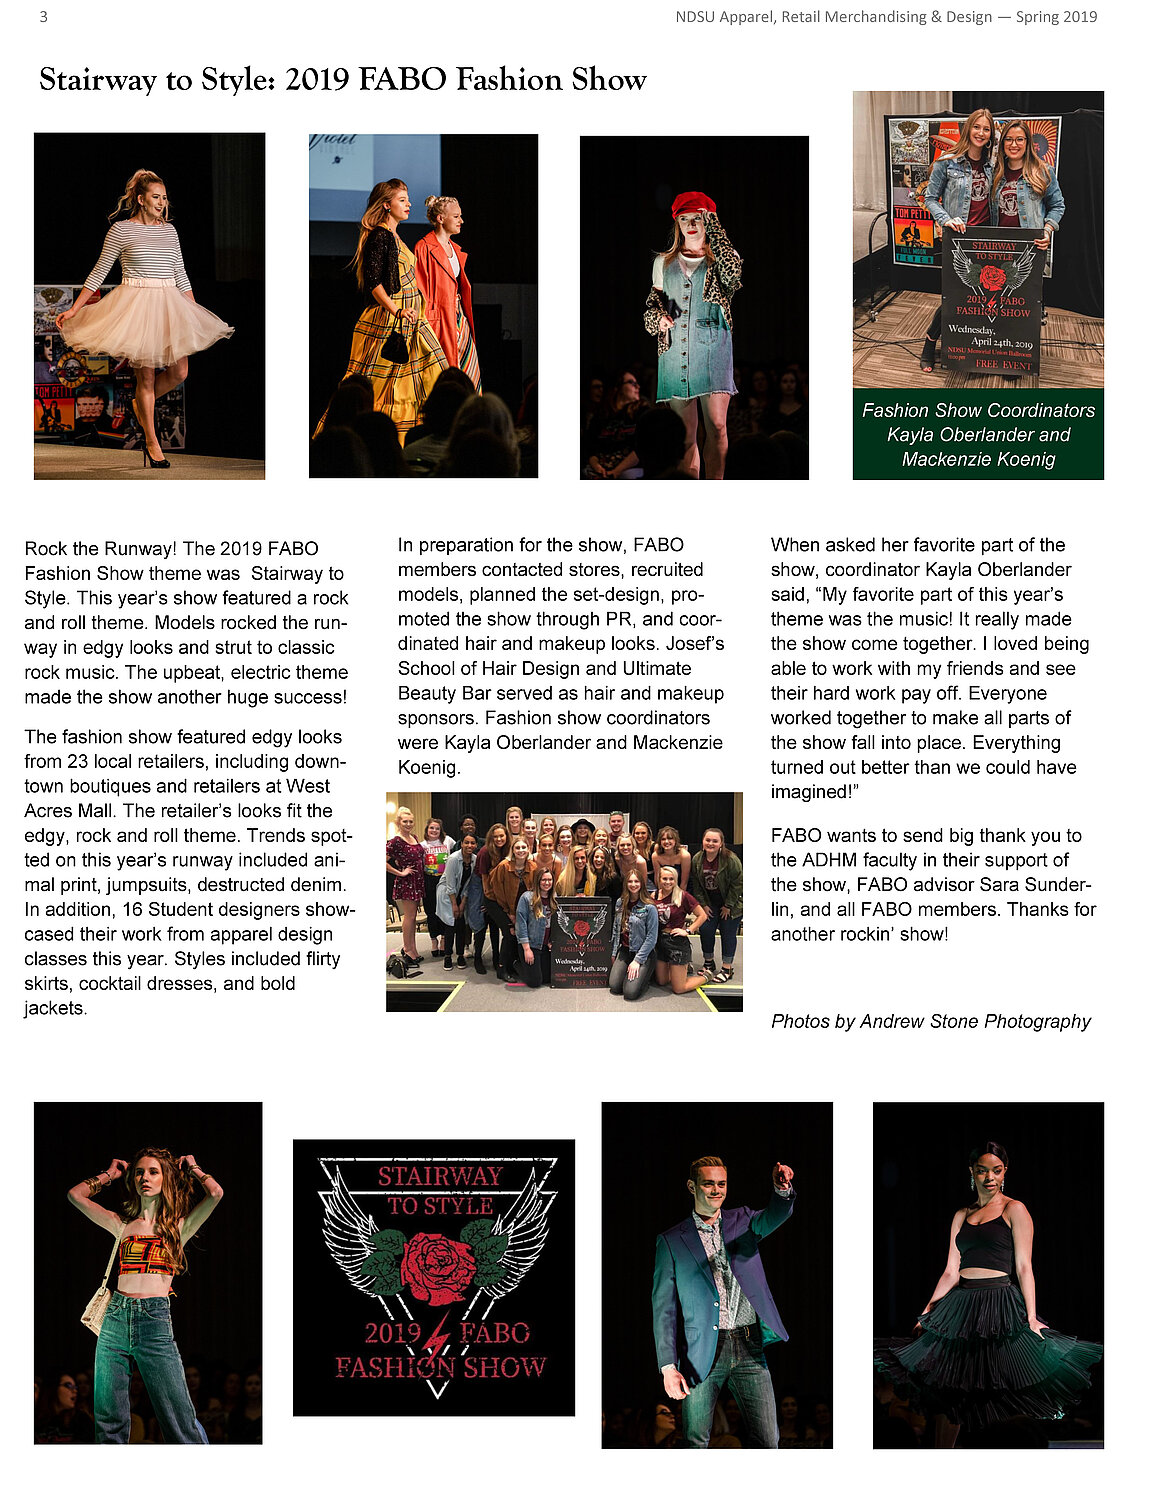 Page three of newsletter